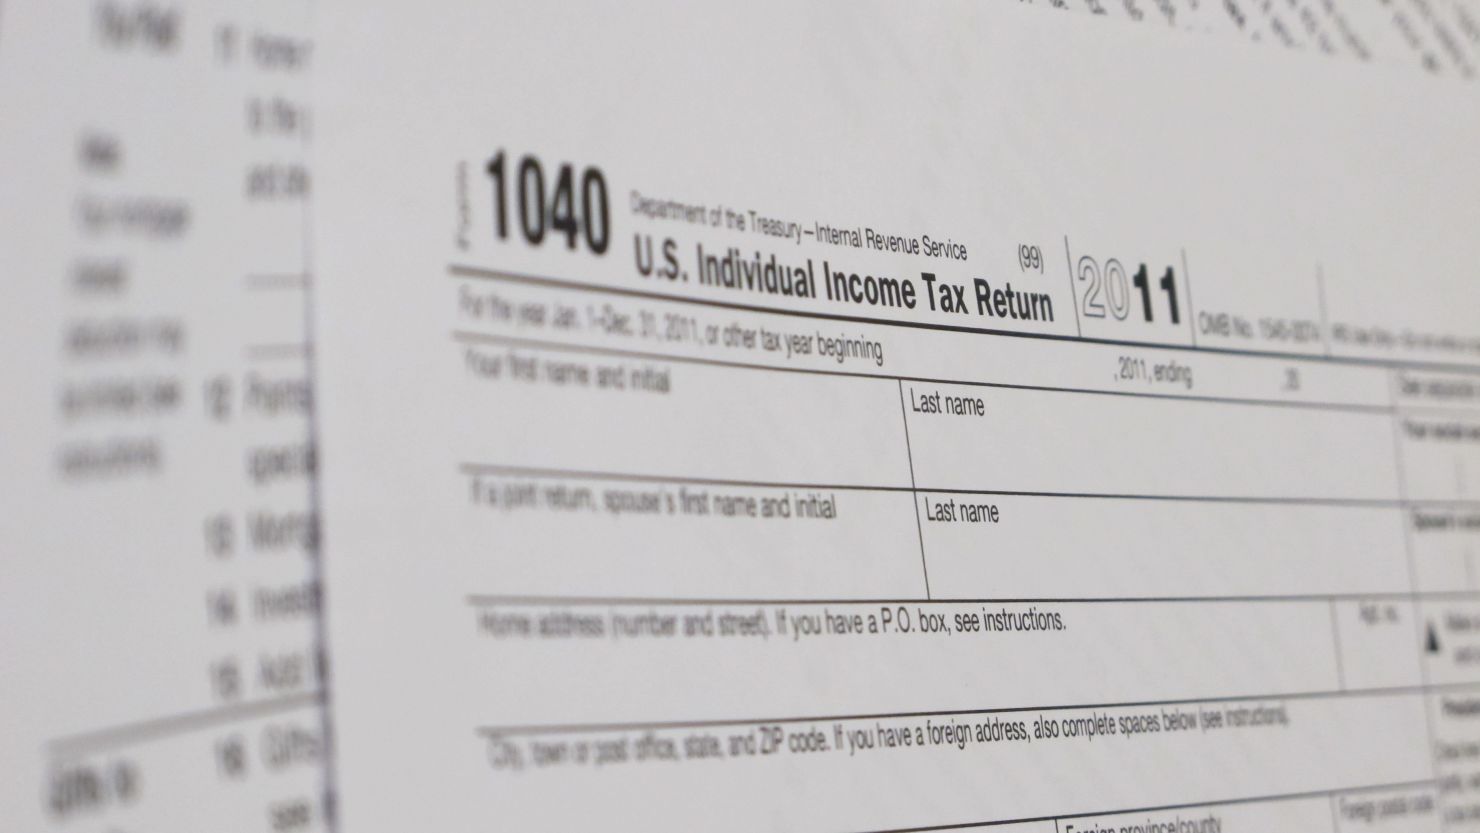 Income tax forms for 2011 are due on Tuesday. Professor Dorothy Brown argues it's time for meaningful reform.